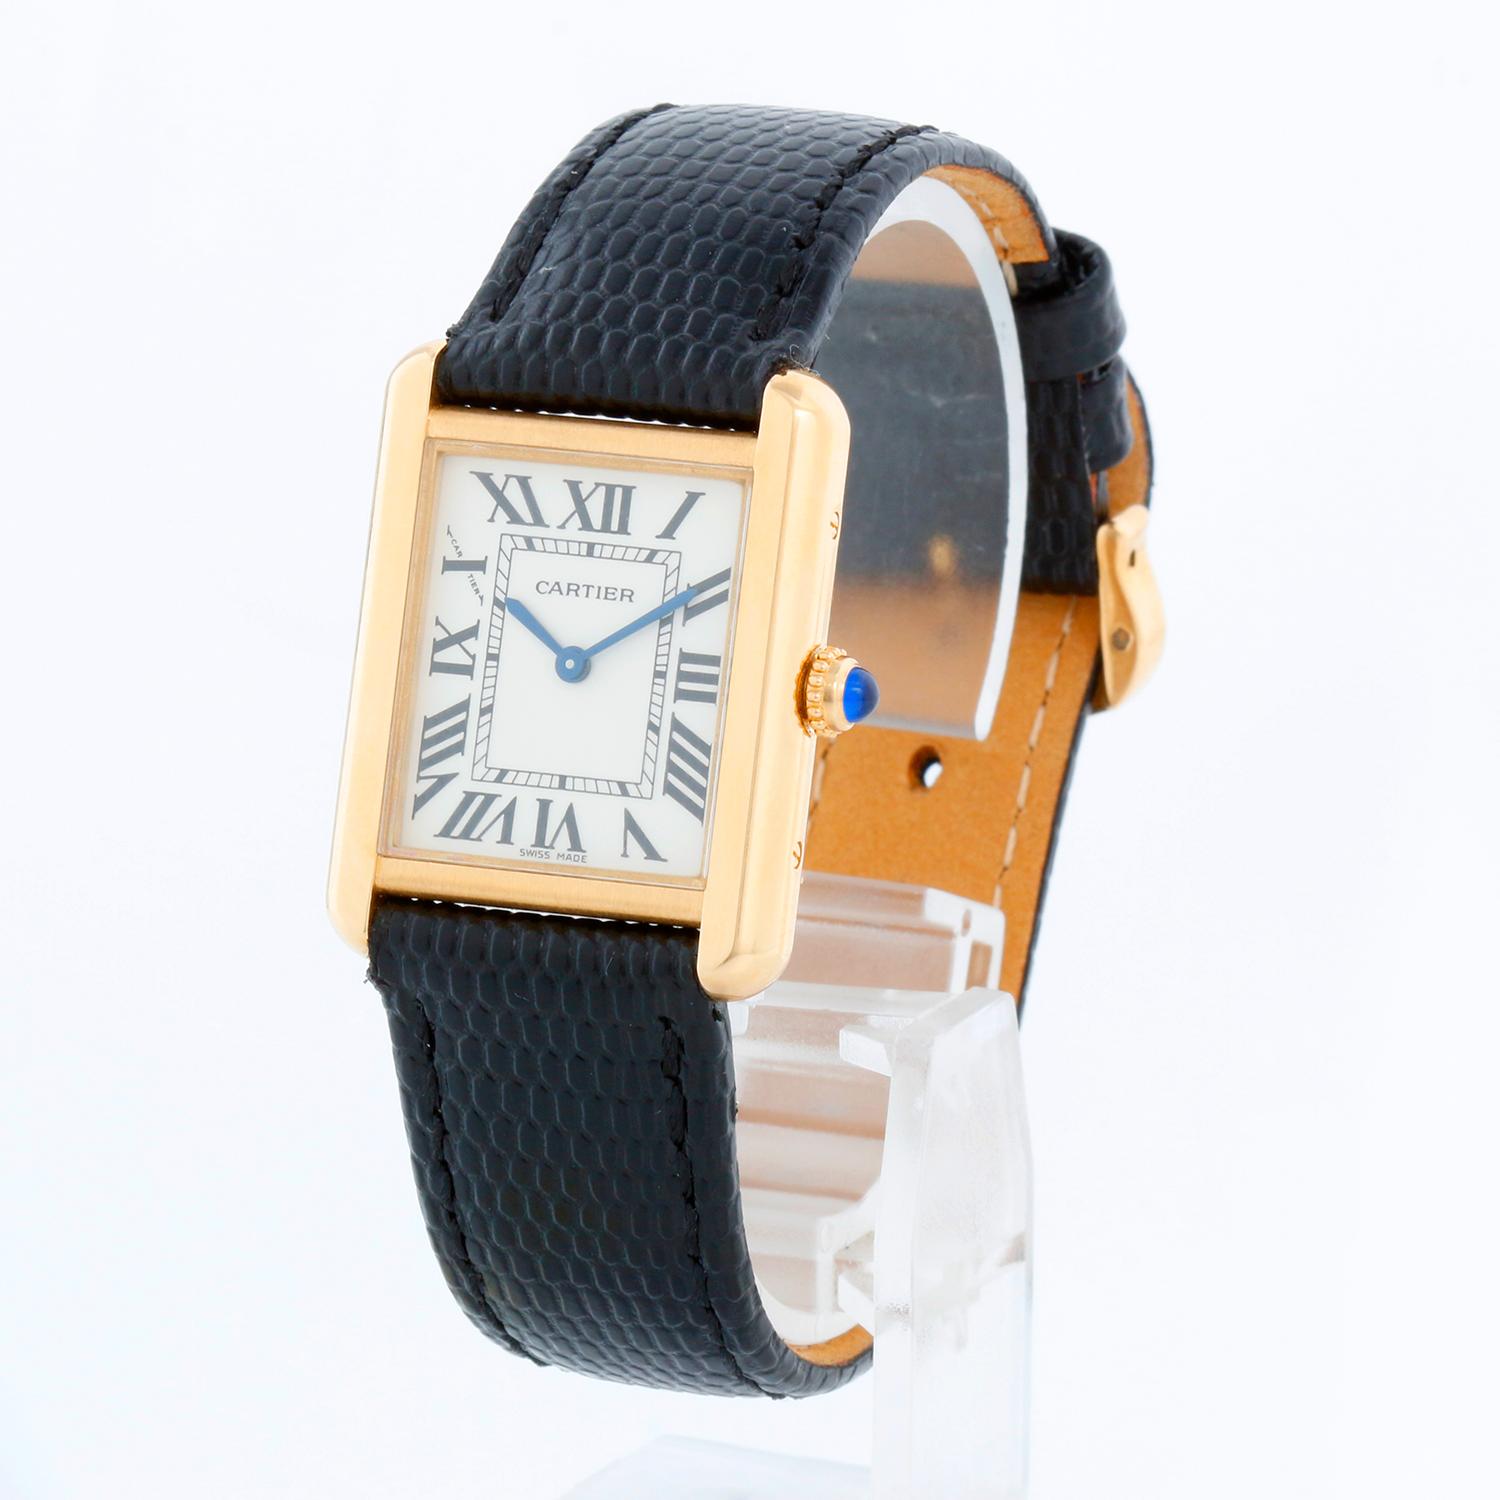 Cartier Tank Solo 18K Yellow Gold Men's Watch W5200002 3168 - Quartz movement. 18k yellow gold case with stainless steel back  (24 mm x 31mm). Silver dial with black Roman numerals. Black Cartier strap with yellow gold tang buckle. Pre-owned with